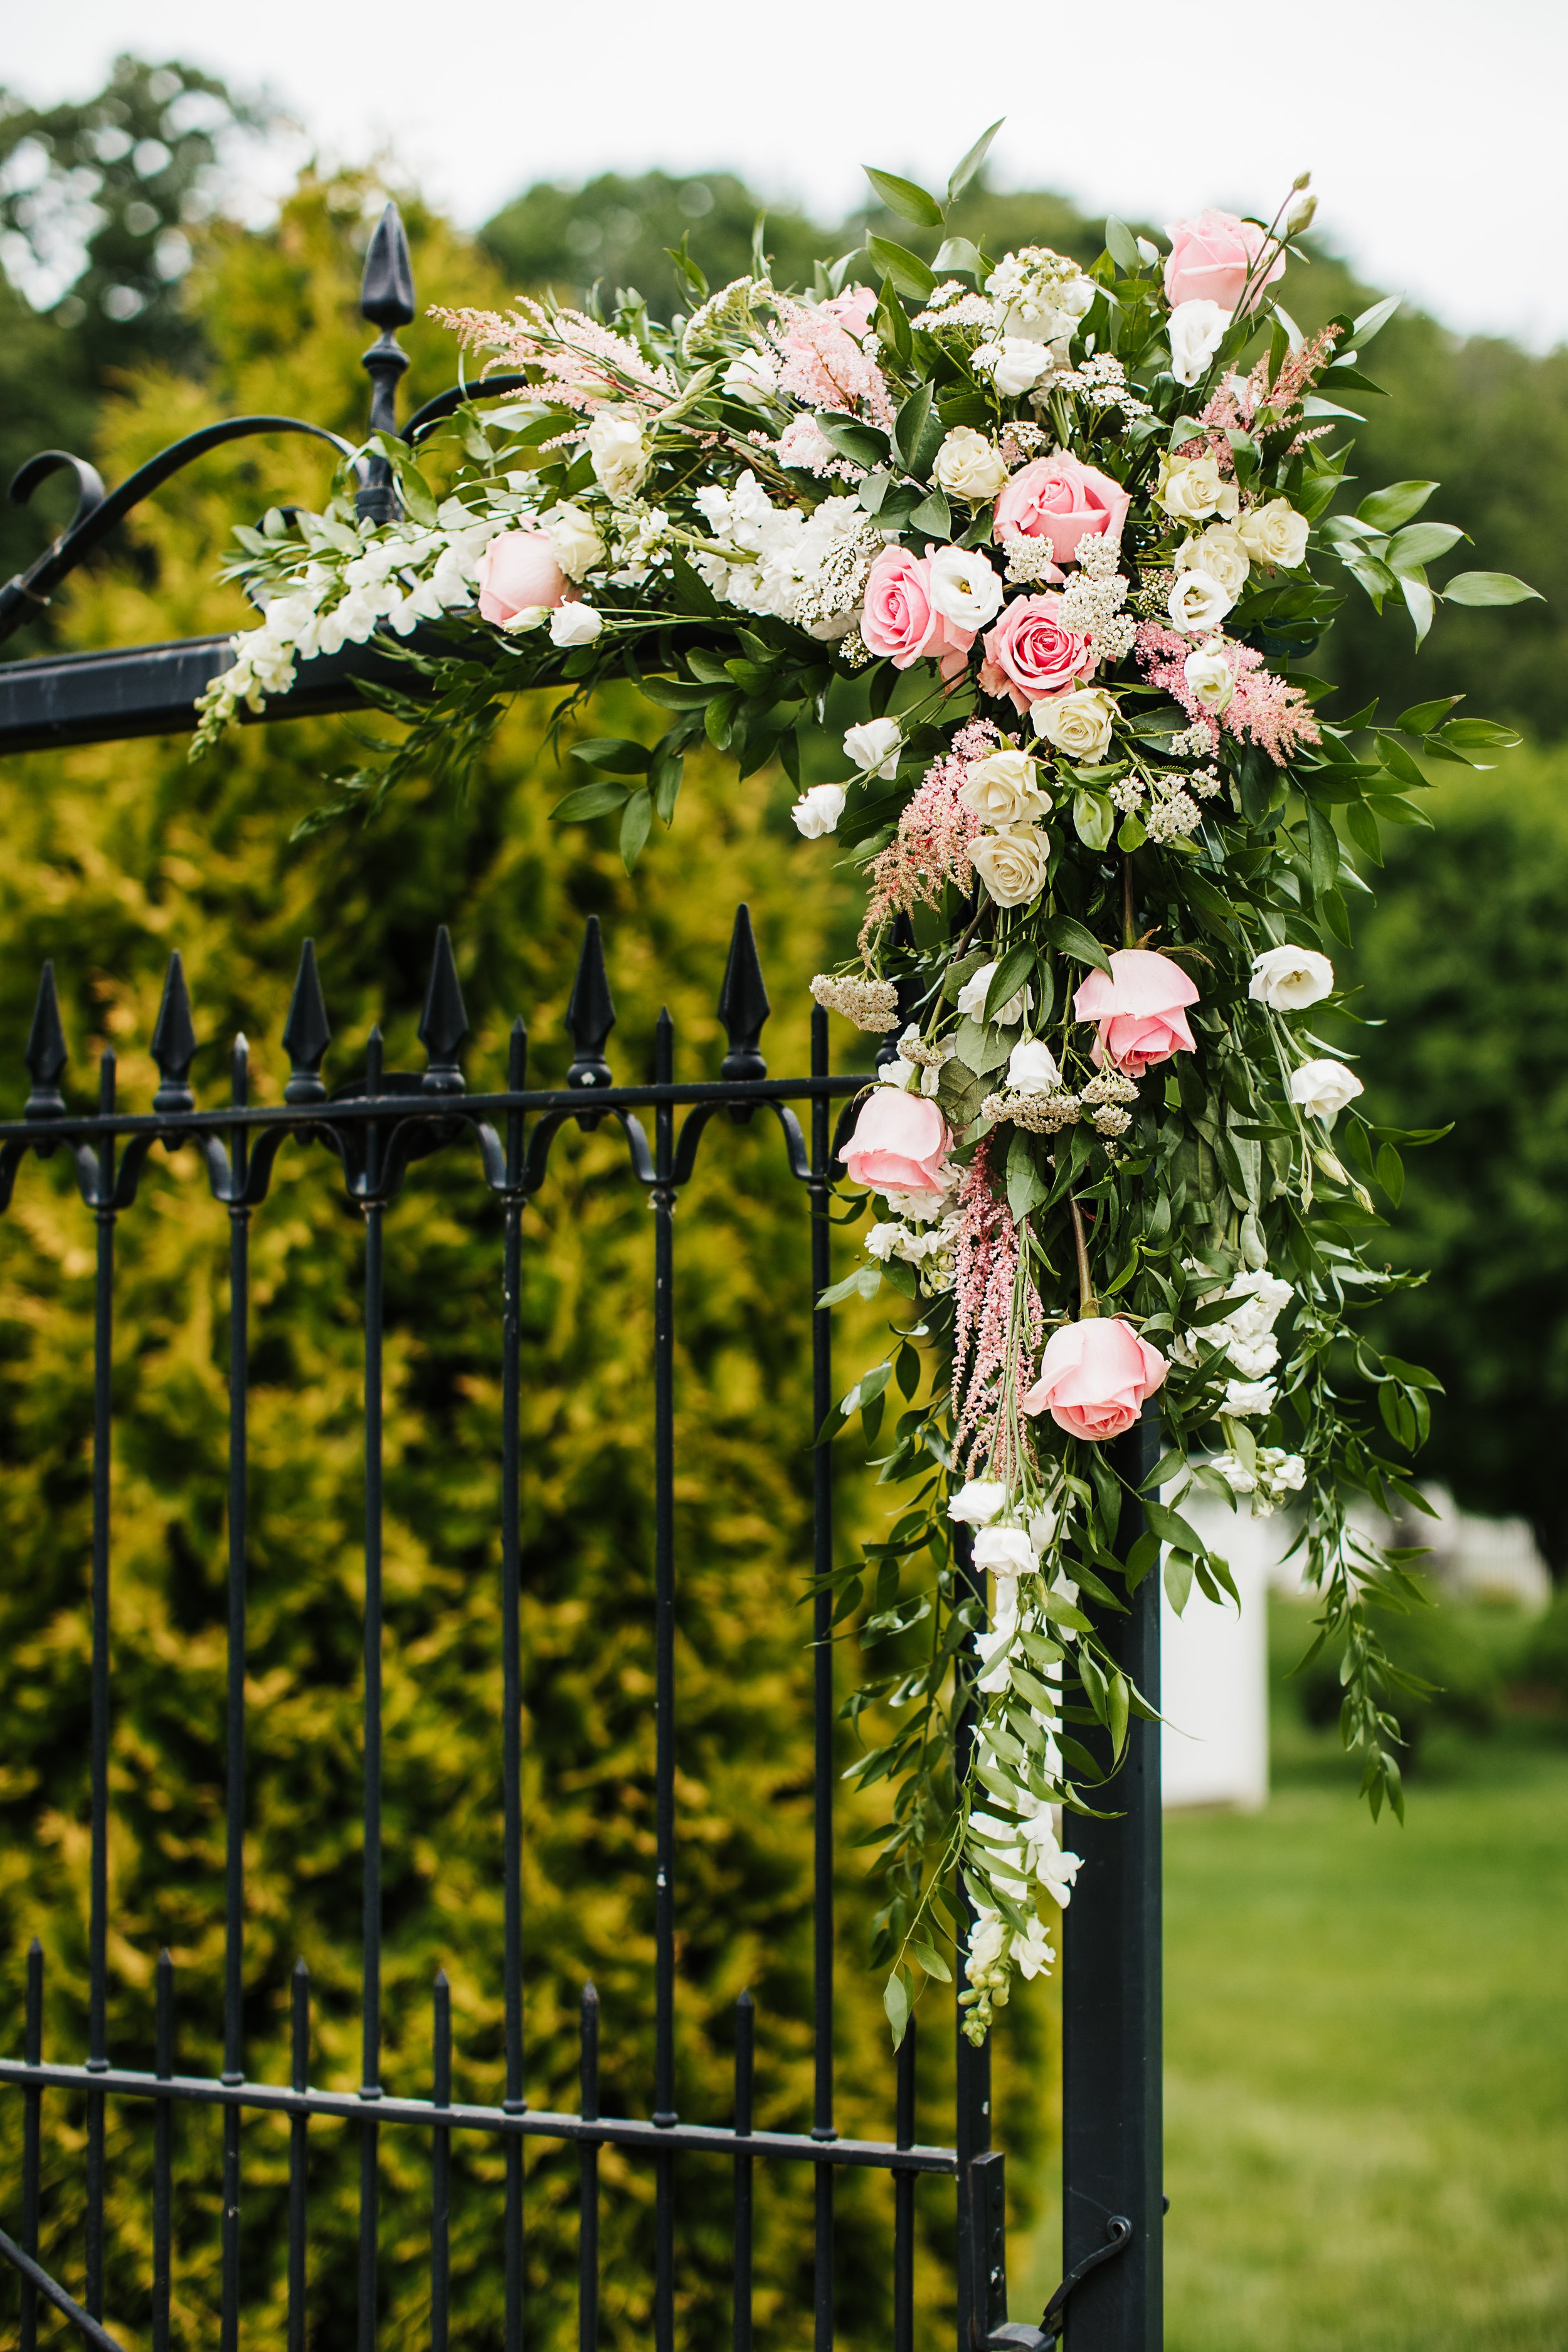  Pink and white rose floral arrangement with white ranunculus and greenery on an entrance gate. wedding florals intimate wedding #TealaWardPhotography #illinoisphotographer #princetonillinois #weddingphotographer #intimatewedding 